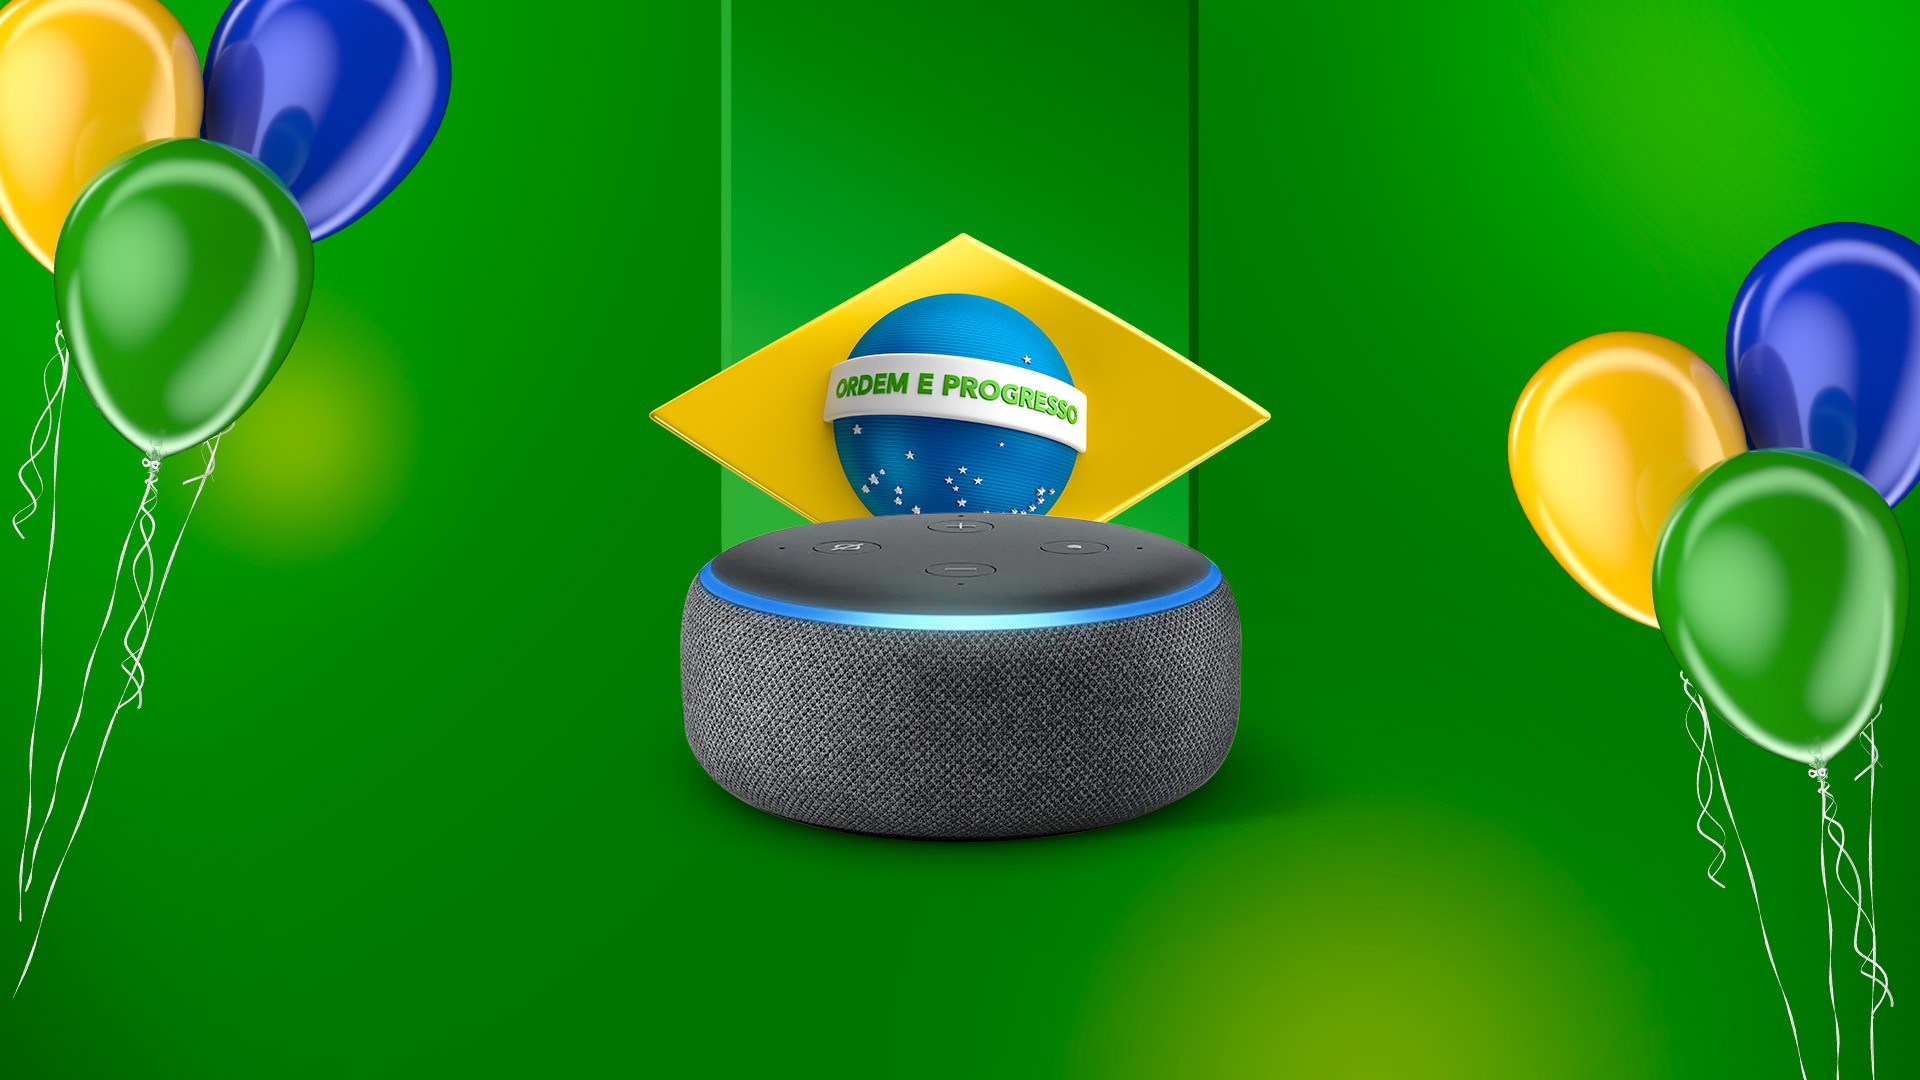 Amazon is celebrating the 4th anniversary of Alexa in Brazil with new features